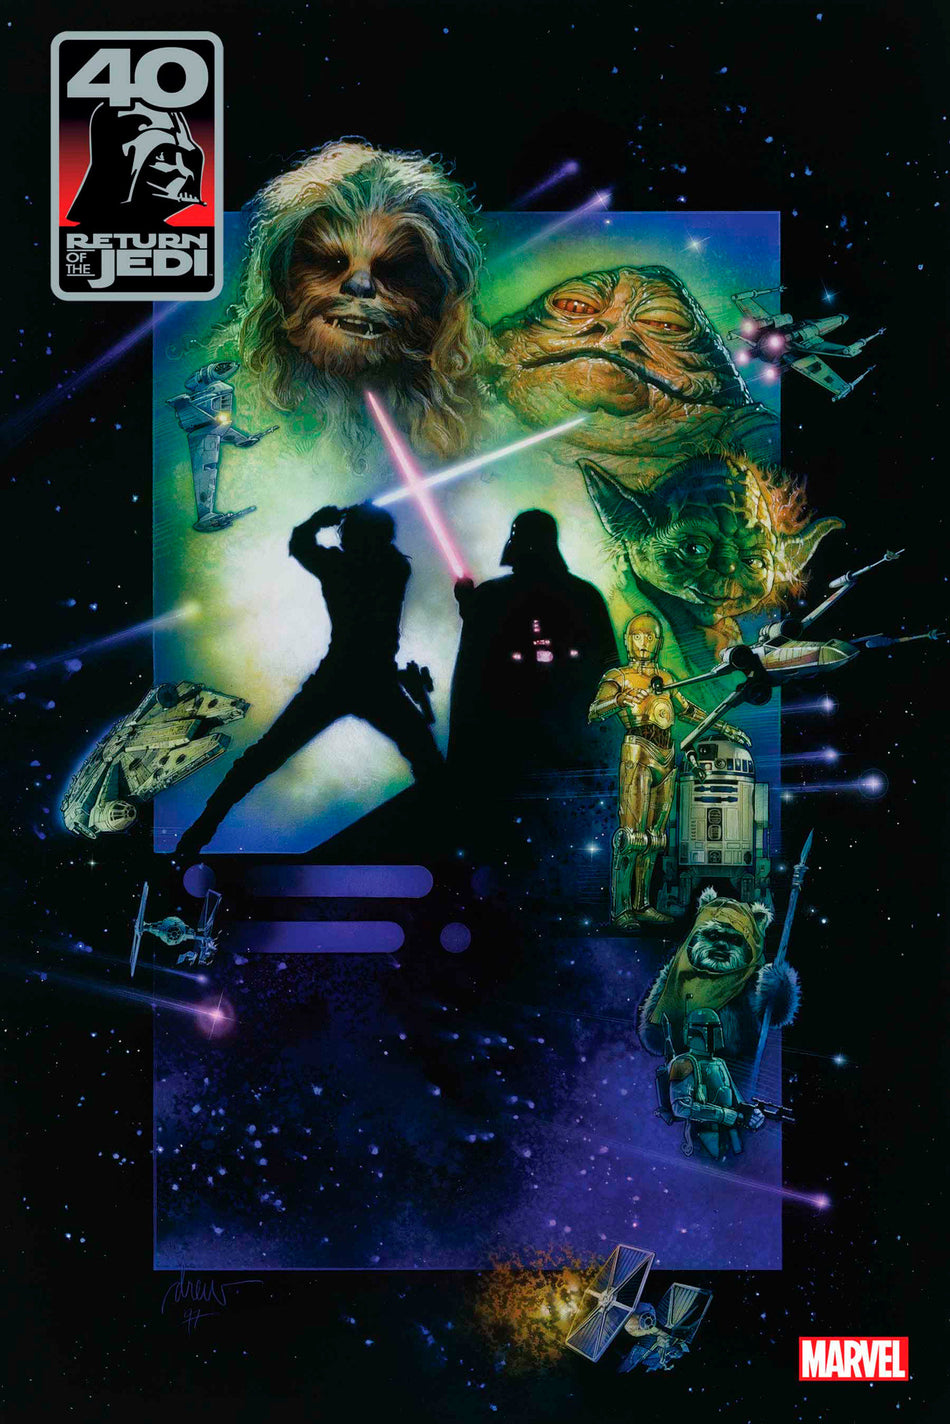 Stock photo of Star Wars: Return Of The Jedi - 40th Ann. Covers Chris Sprouse 1 Movie Poster Variant Comics sold by Stronghold Collectibles